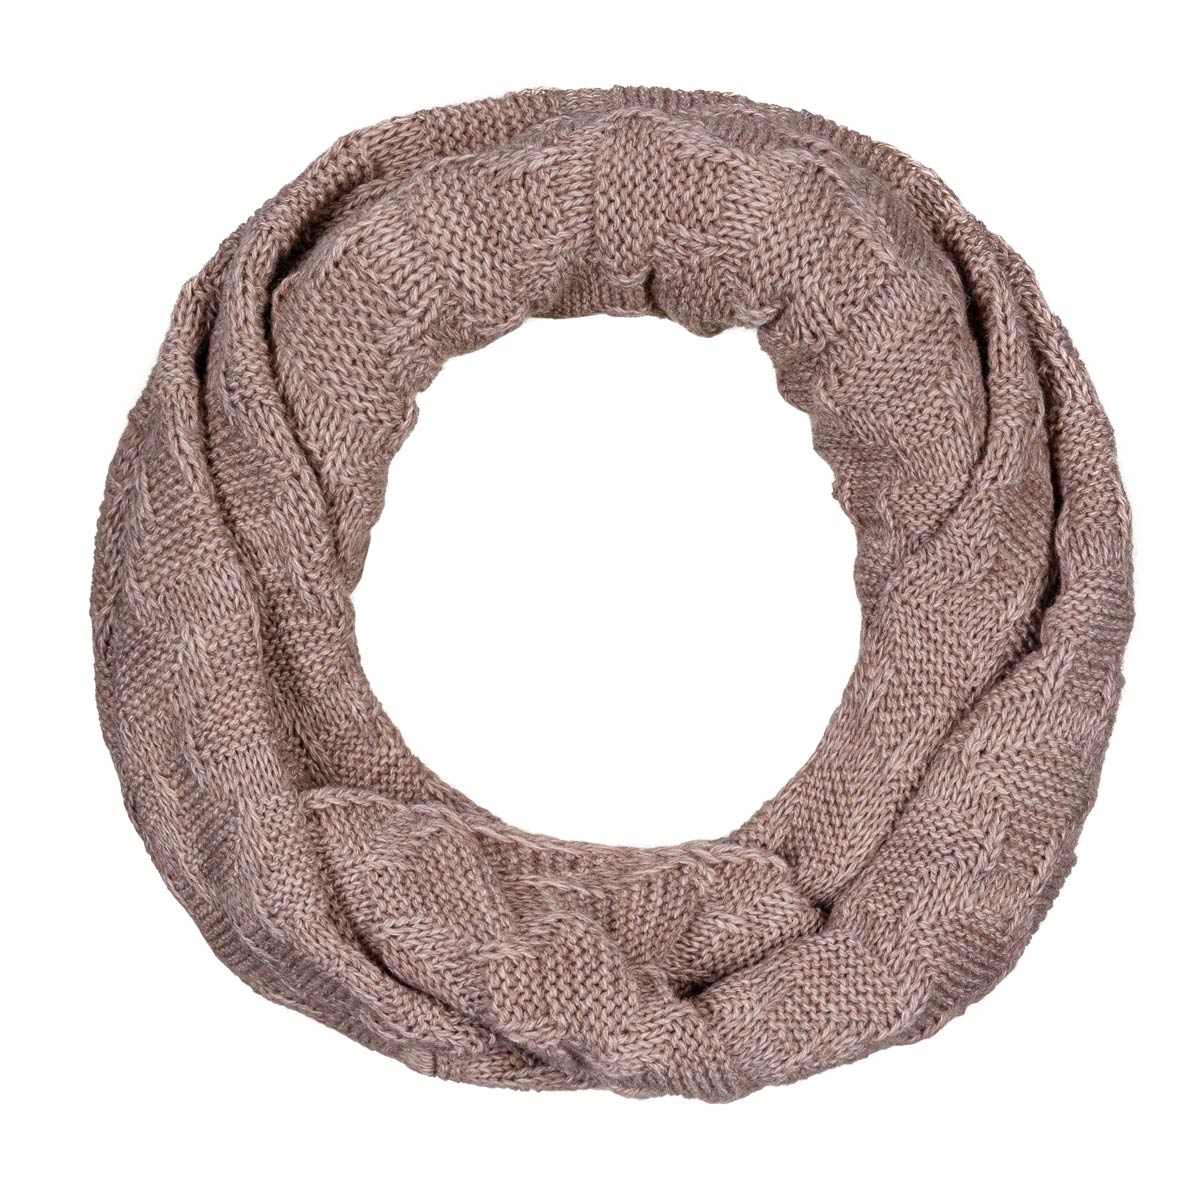 AT-06327_F12-1--_Snood-marron-taupe